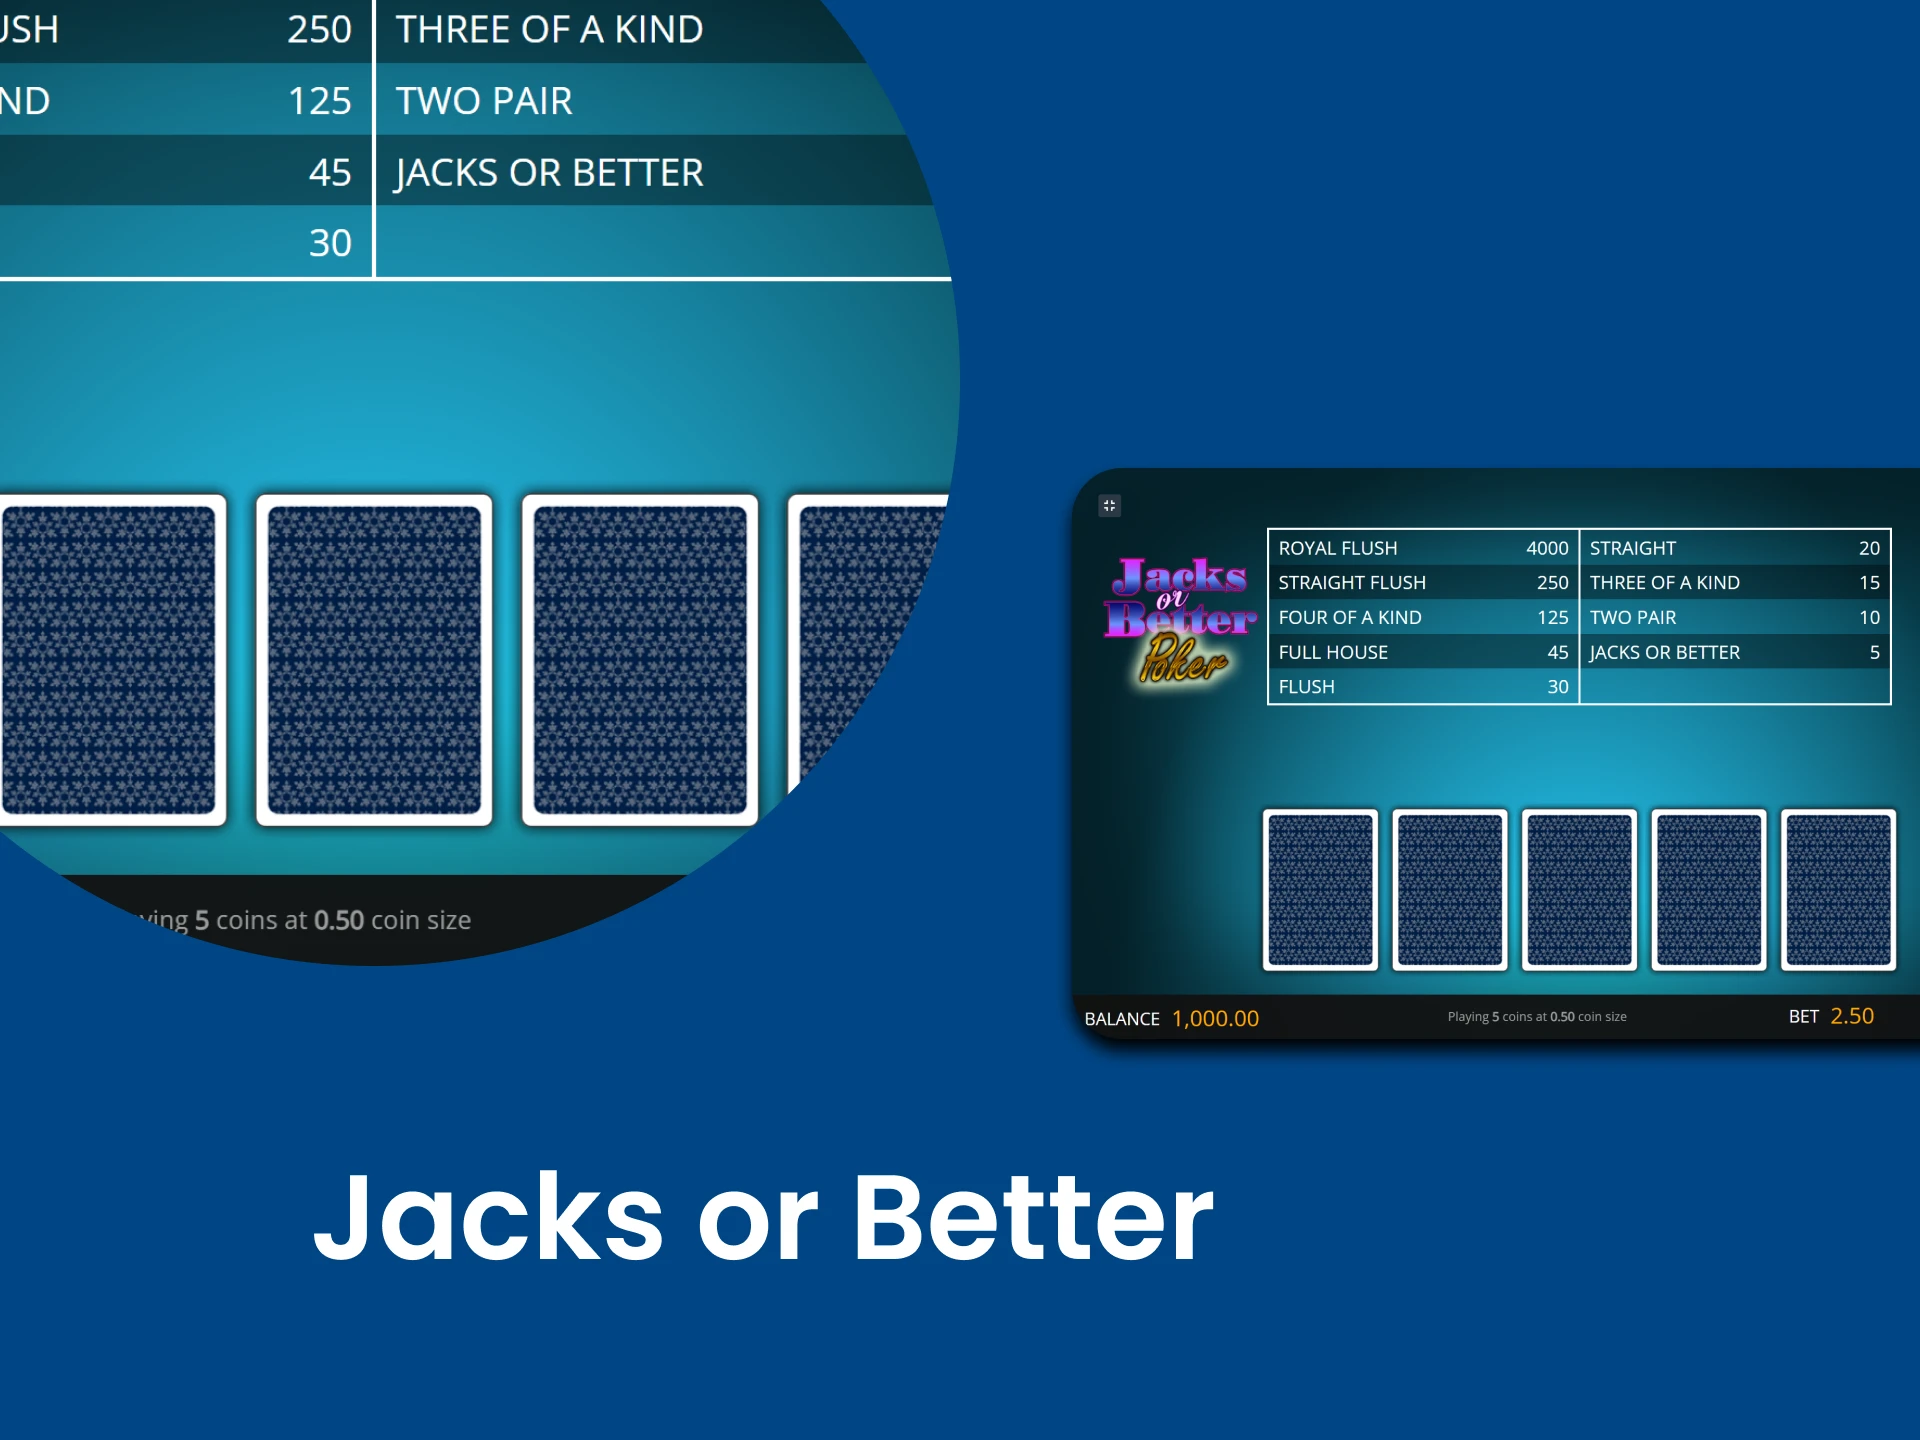 To play Video Poker, choose a game like Jacks or Better.